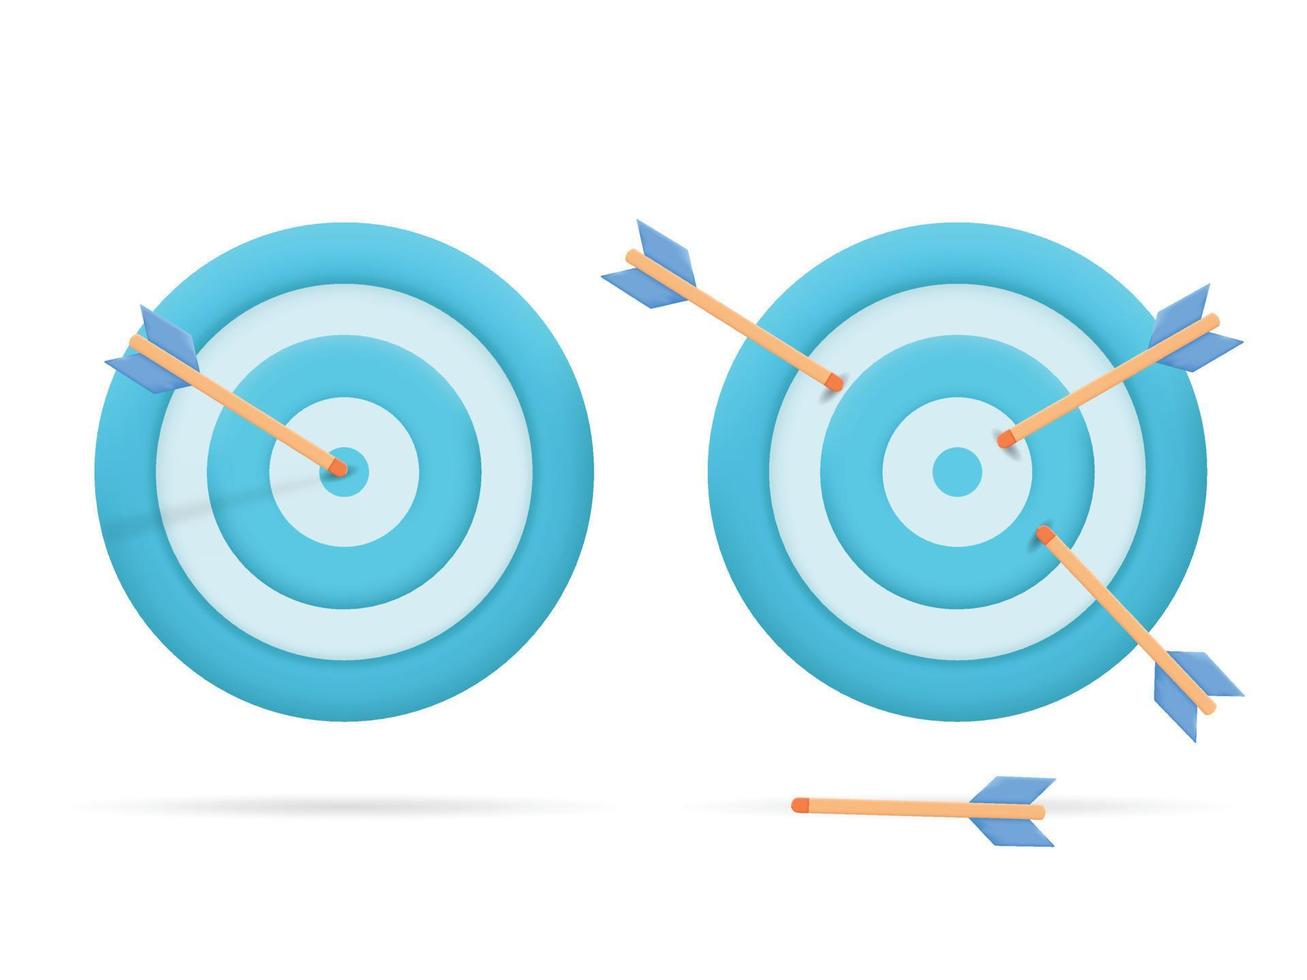 Dart arrow hit the center of target and missed hitting target. Business finance target, goal of success, target achievement concept vector